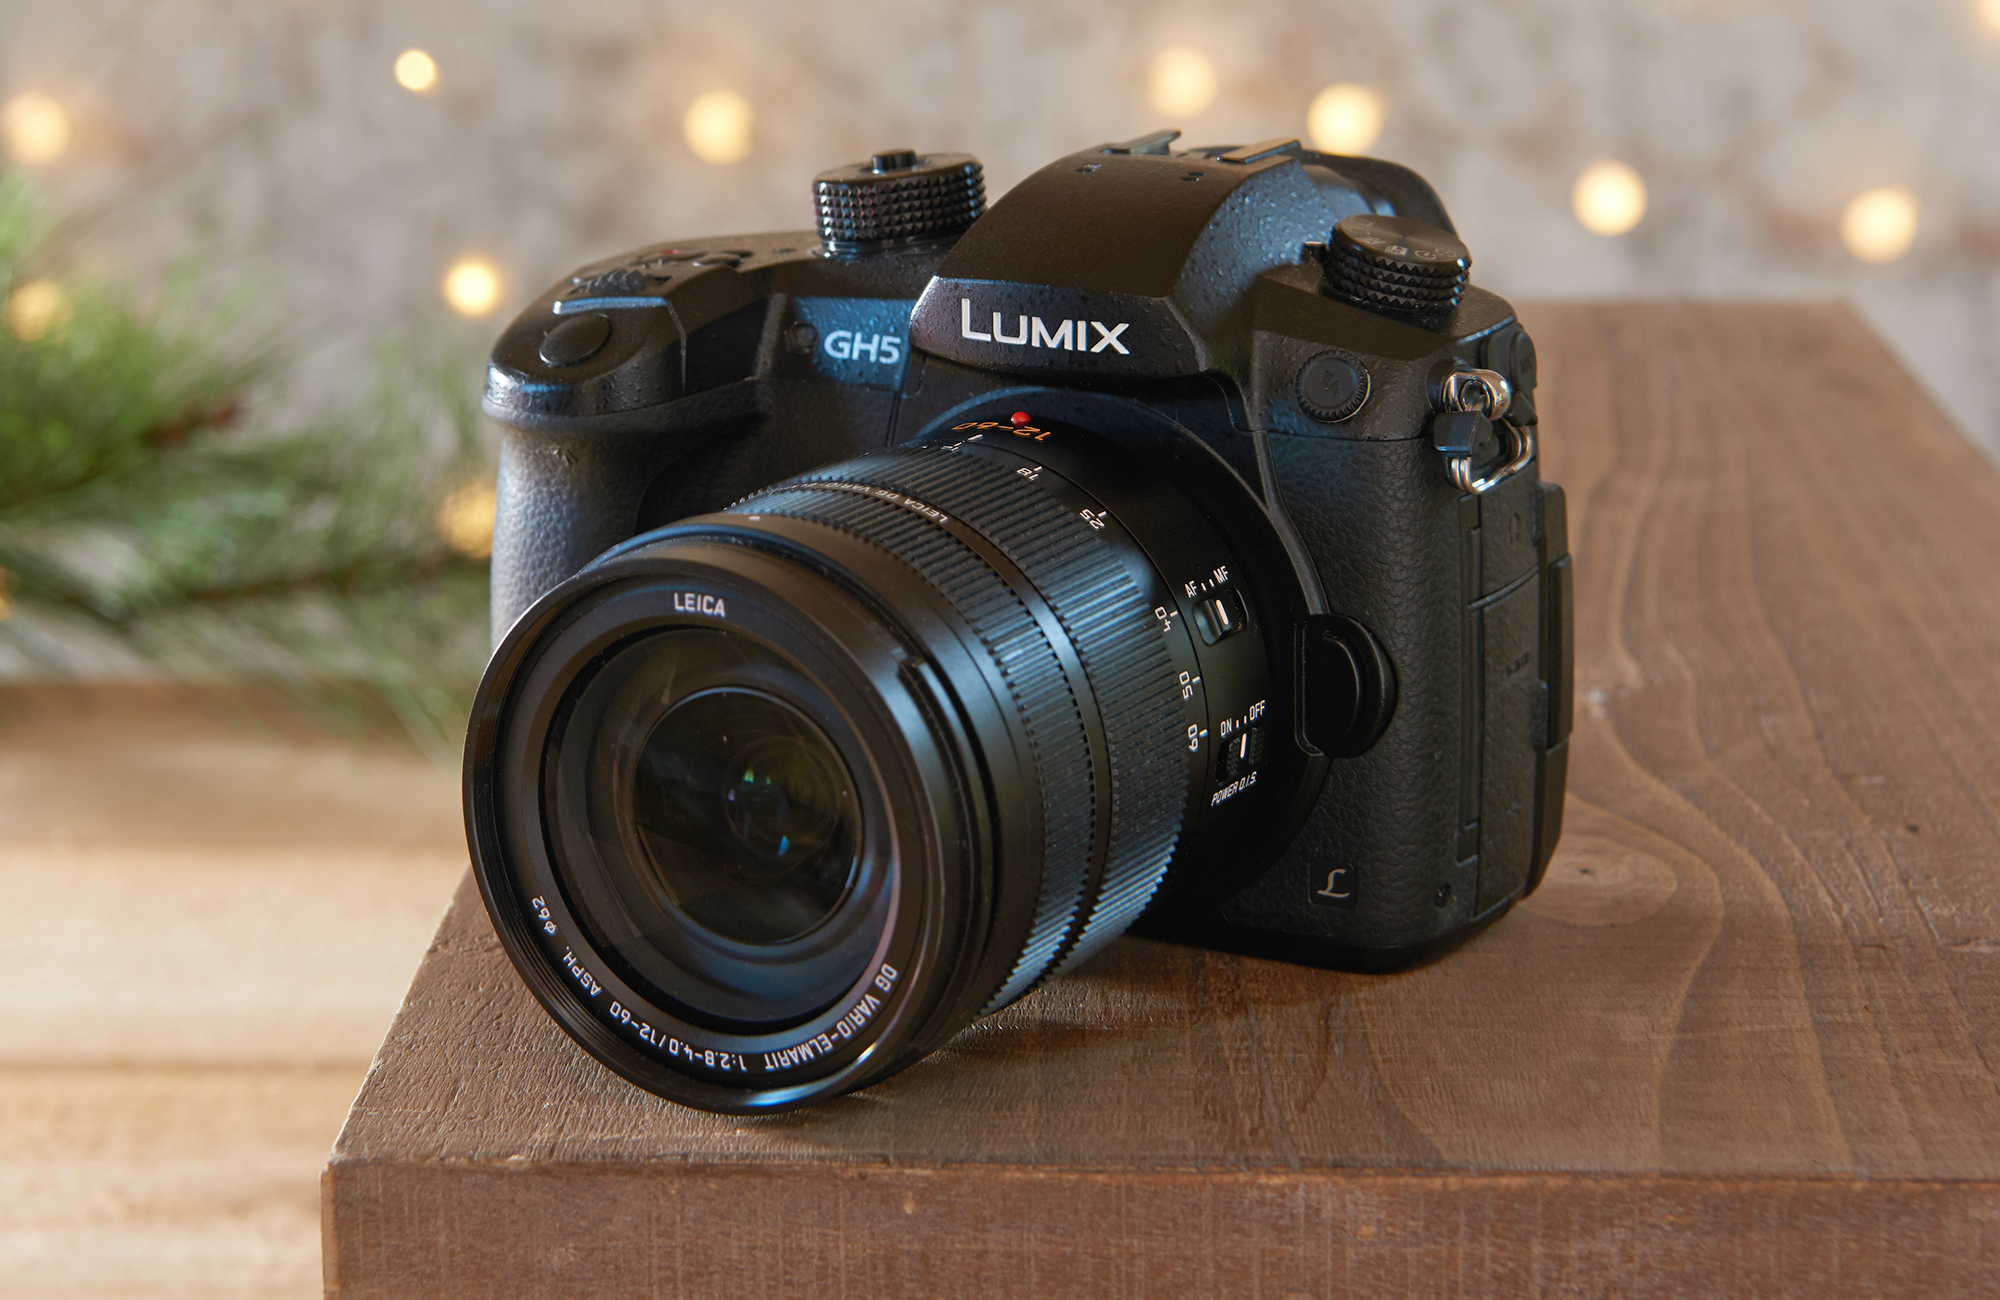 Panasonic GH5 for the Engadget 2021 Holiday Gift Guide.
